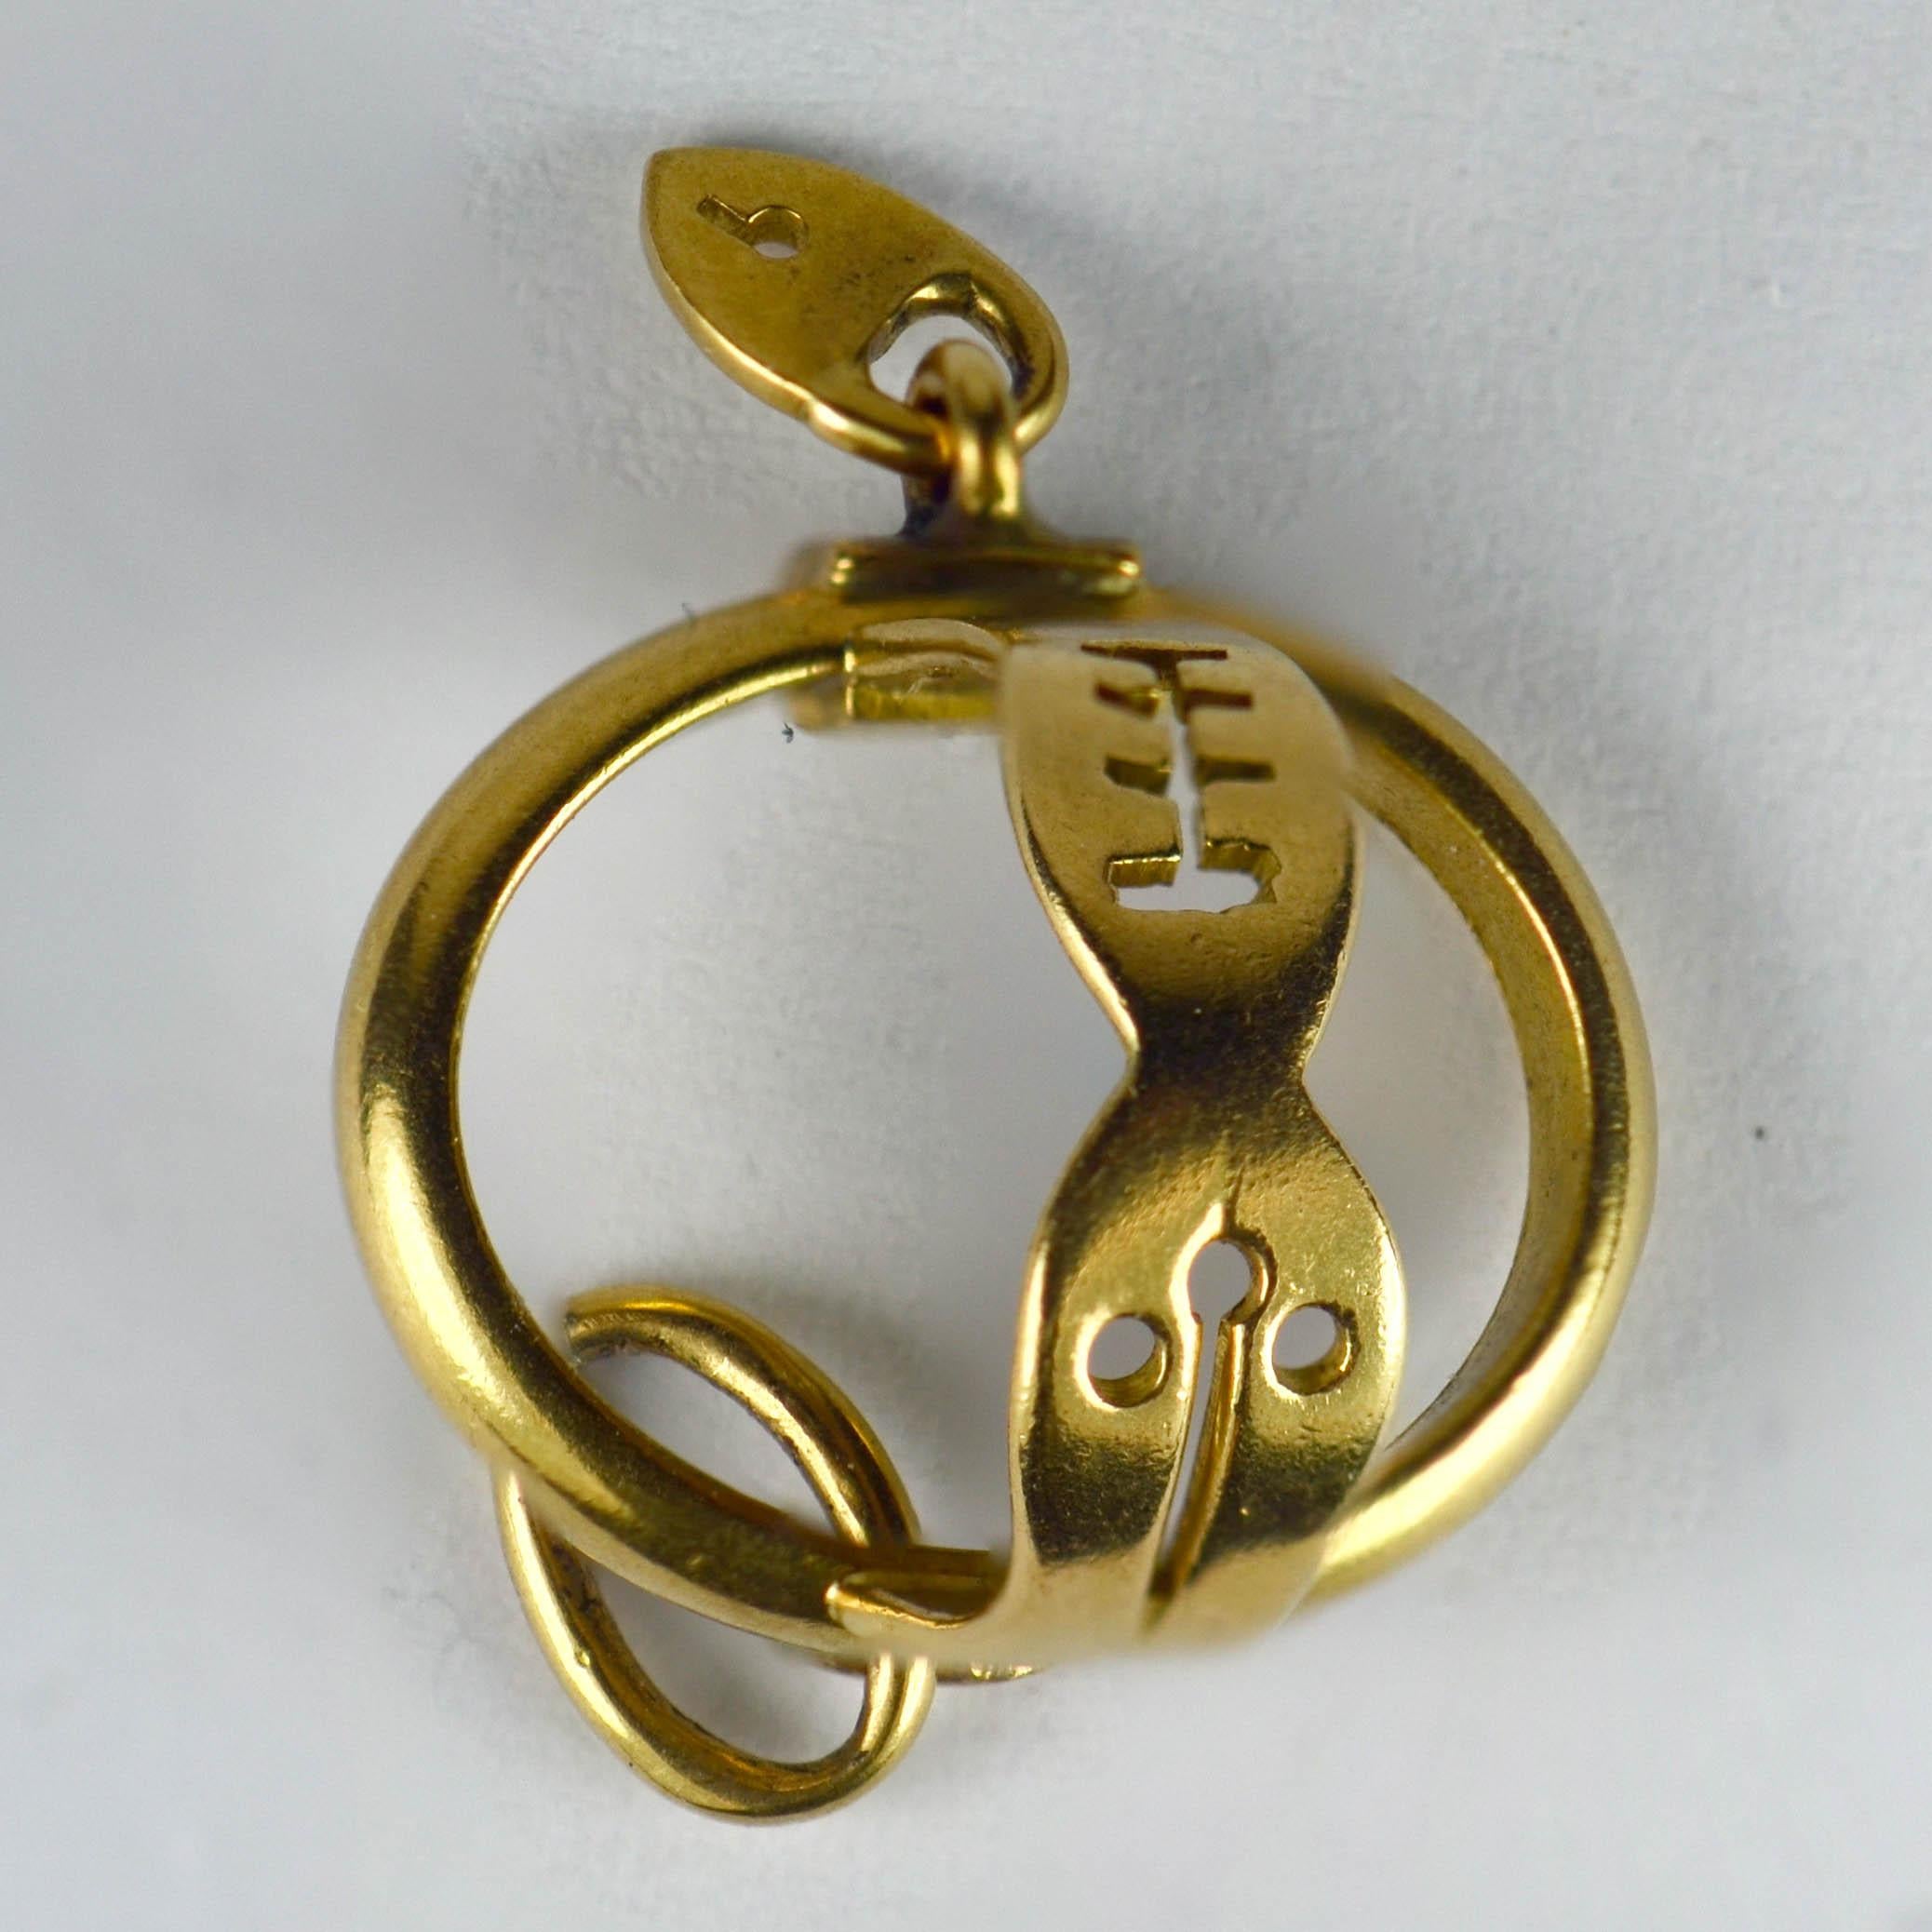 An unusual and amusing charm pendant in 18 karat yellow gold designed as a chastity belt with a love heart padlock. Stamped with the French import mark for 18 karat gold.

Dimensions: 1.5 x 1.3 x 1.2 cm
Weight: 1.37 grams